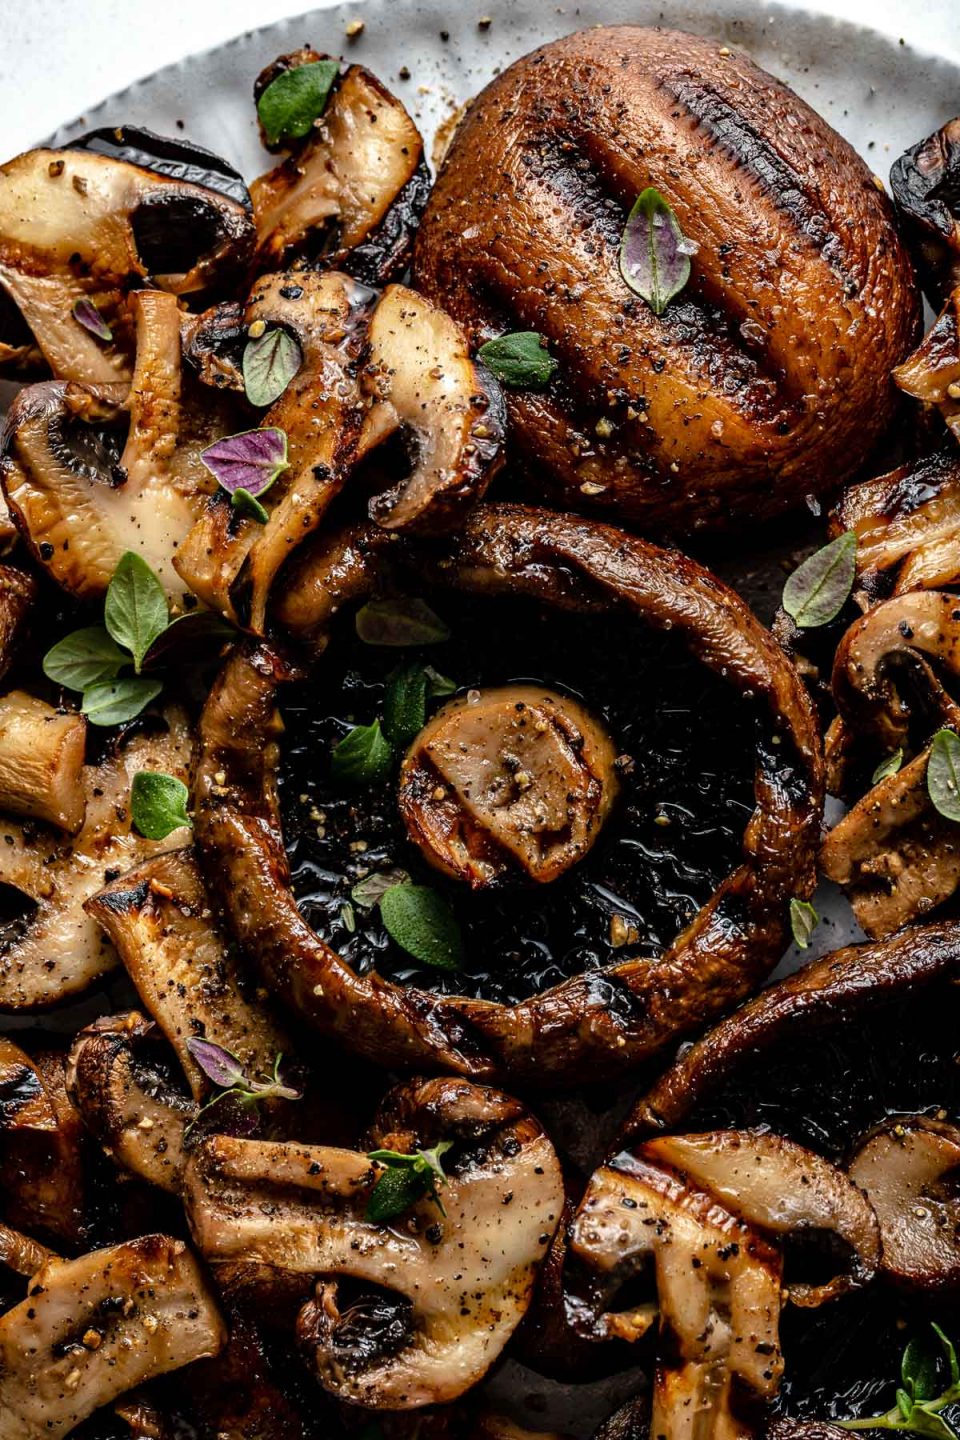 Close up of grilled mushrooms with char marks arranged on a white ceramic plate. The grilled mushrooms are garnished with kosher salt, ground black pepper, & fresh herbs.